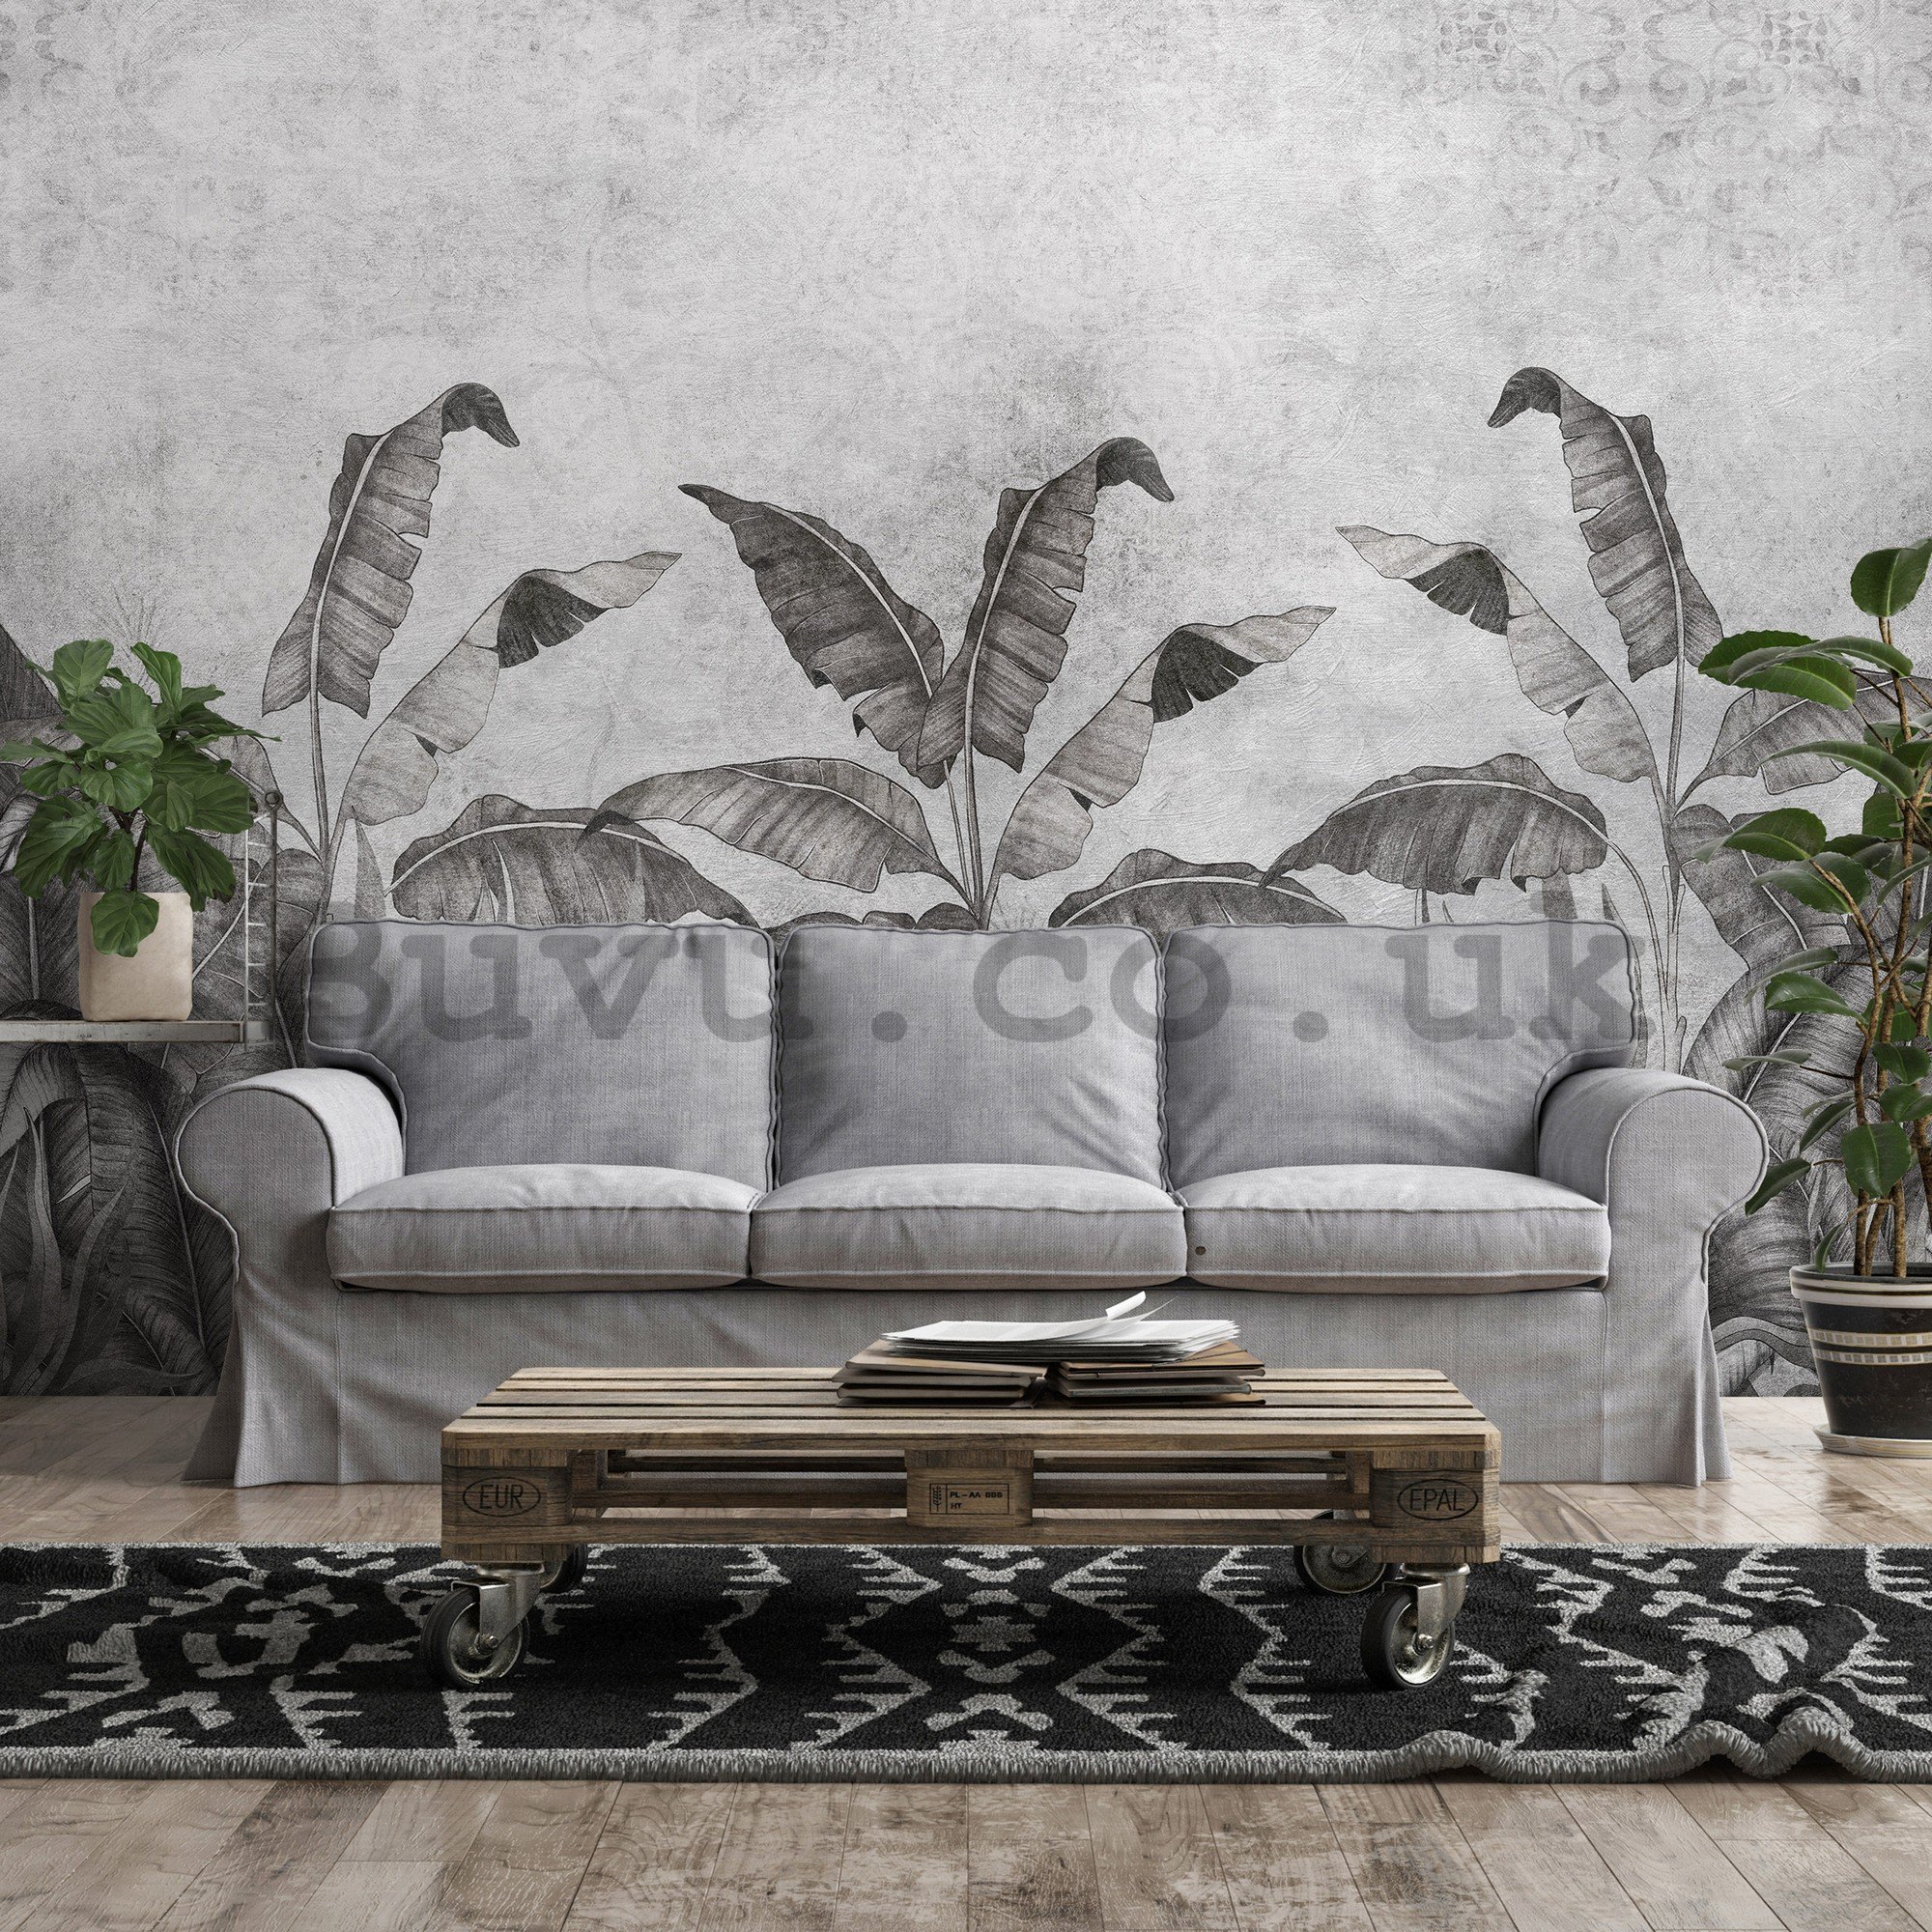 Wall mural vlies: Black and white imitation of natural leave (2) - 254x184 cm